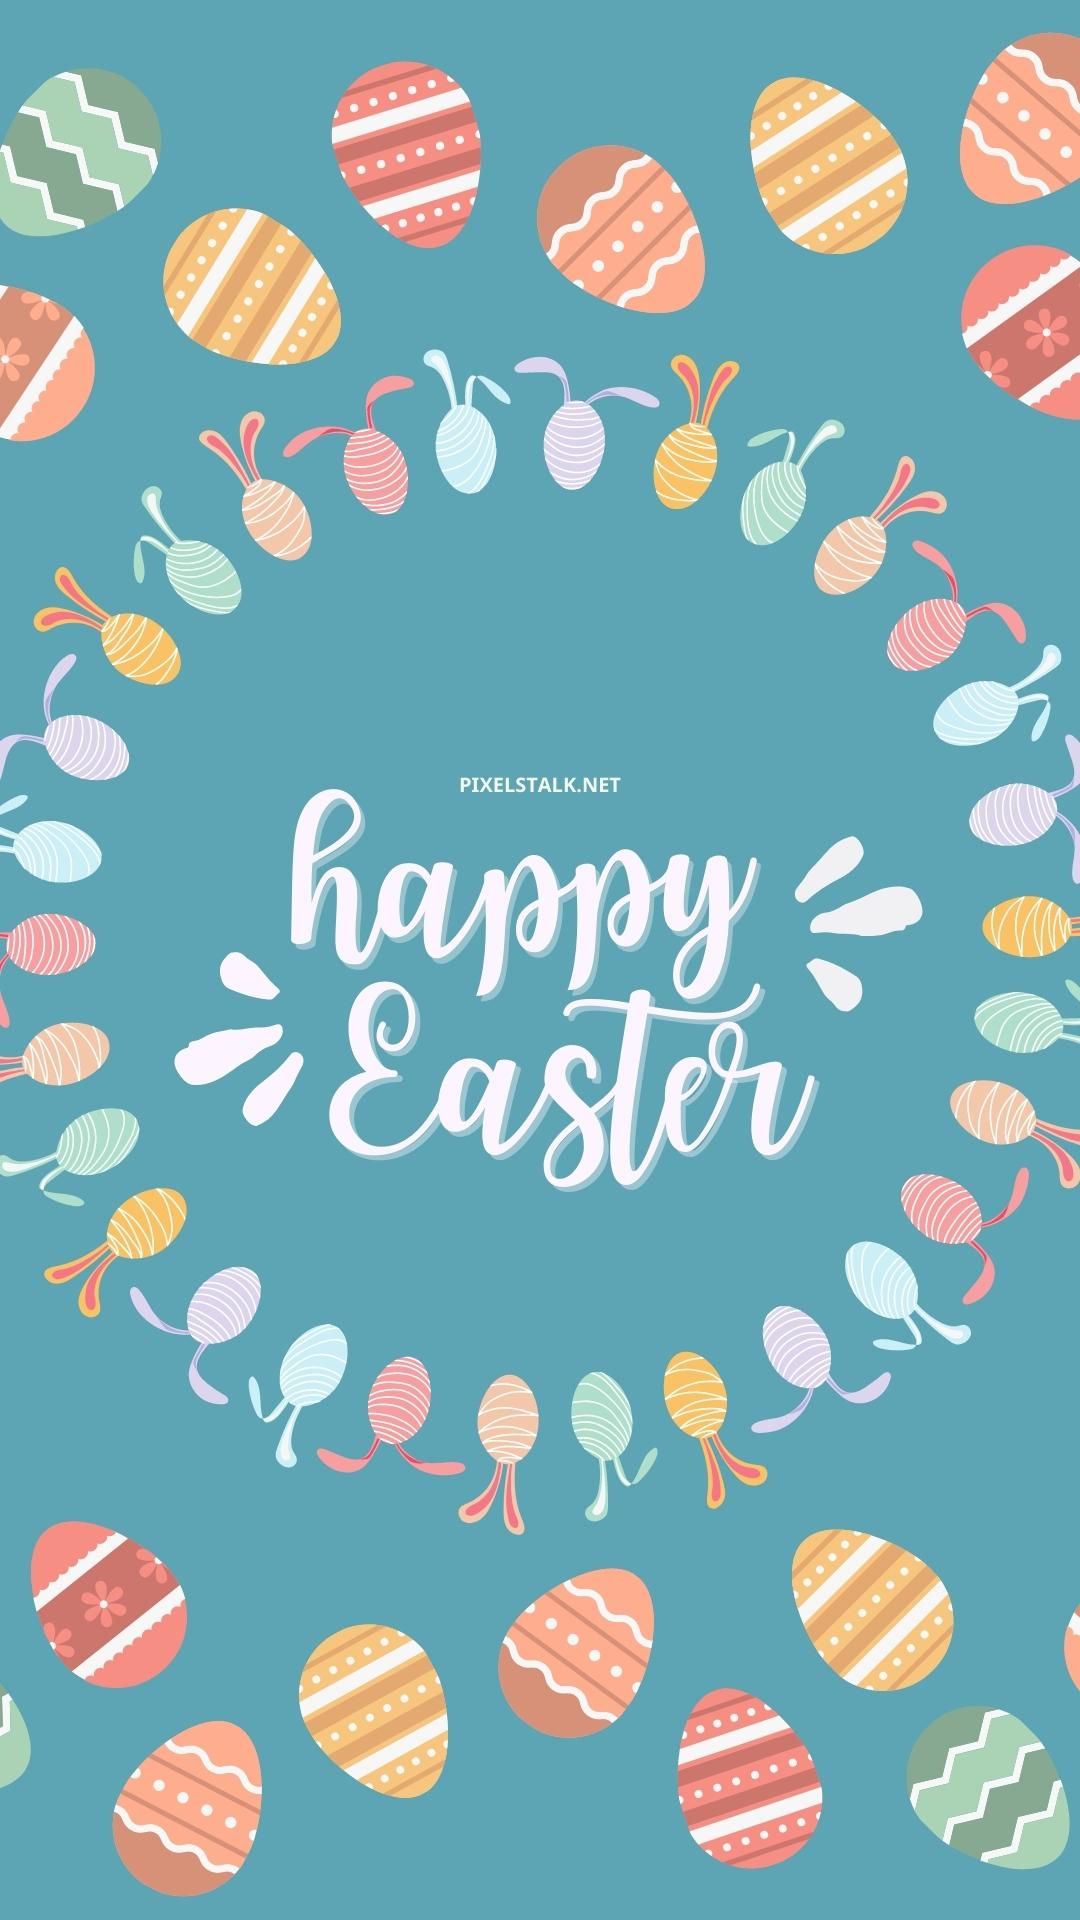 Happy easter greeting card with colorful eggs - Easter